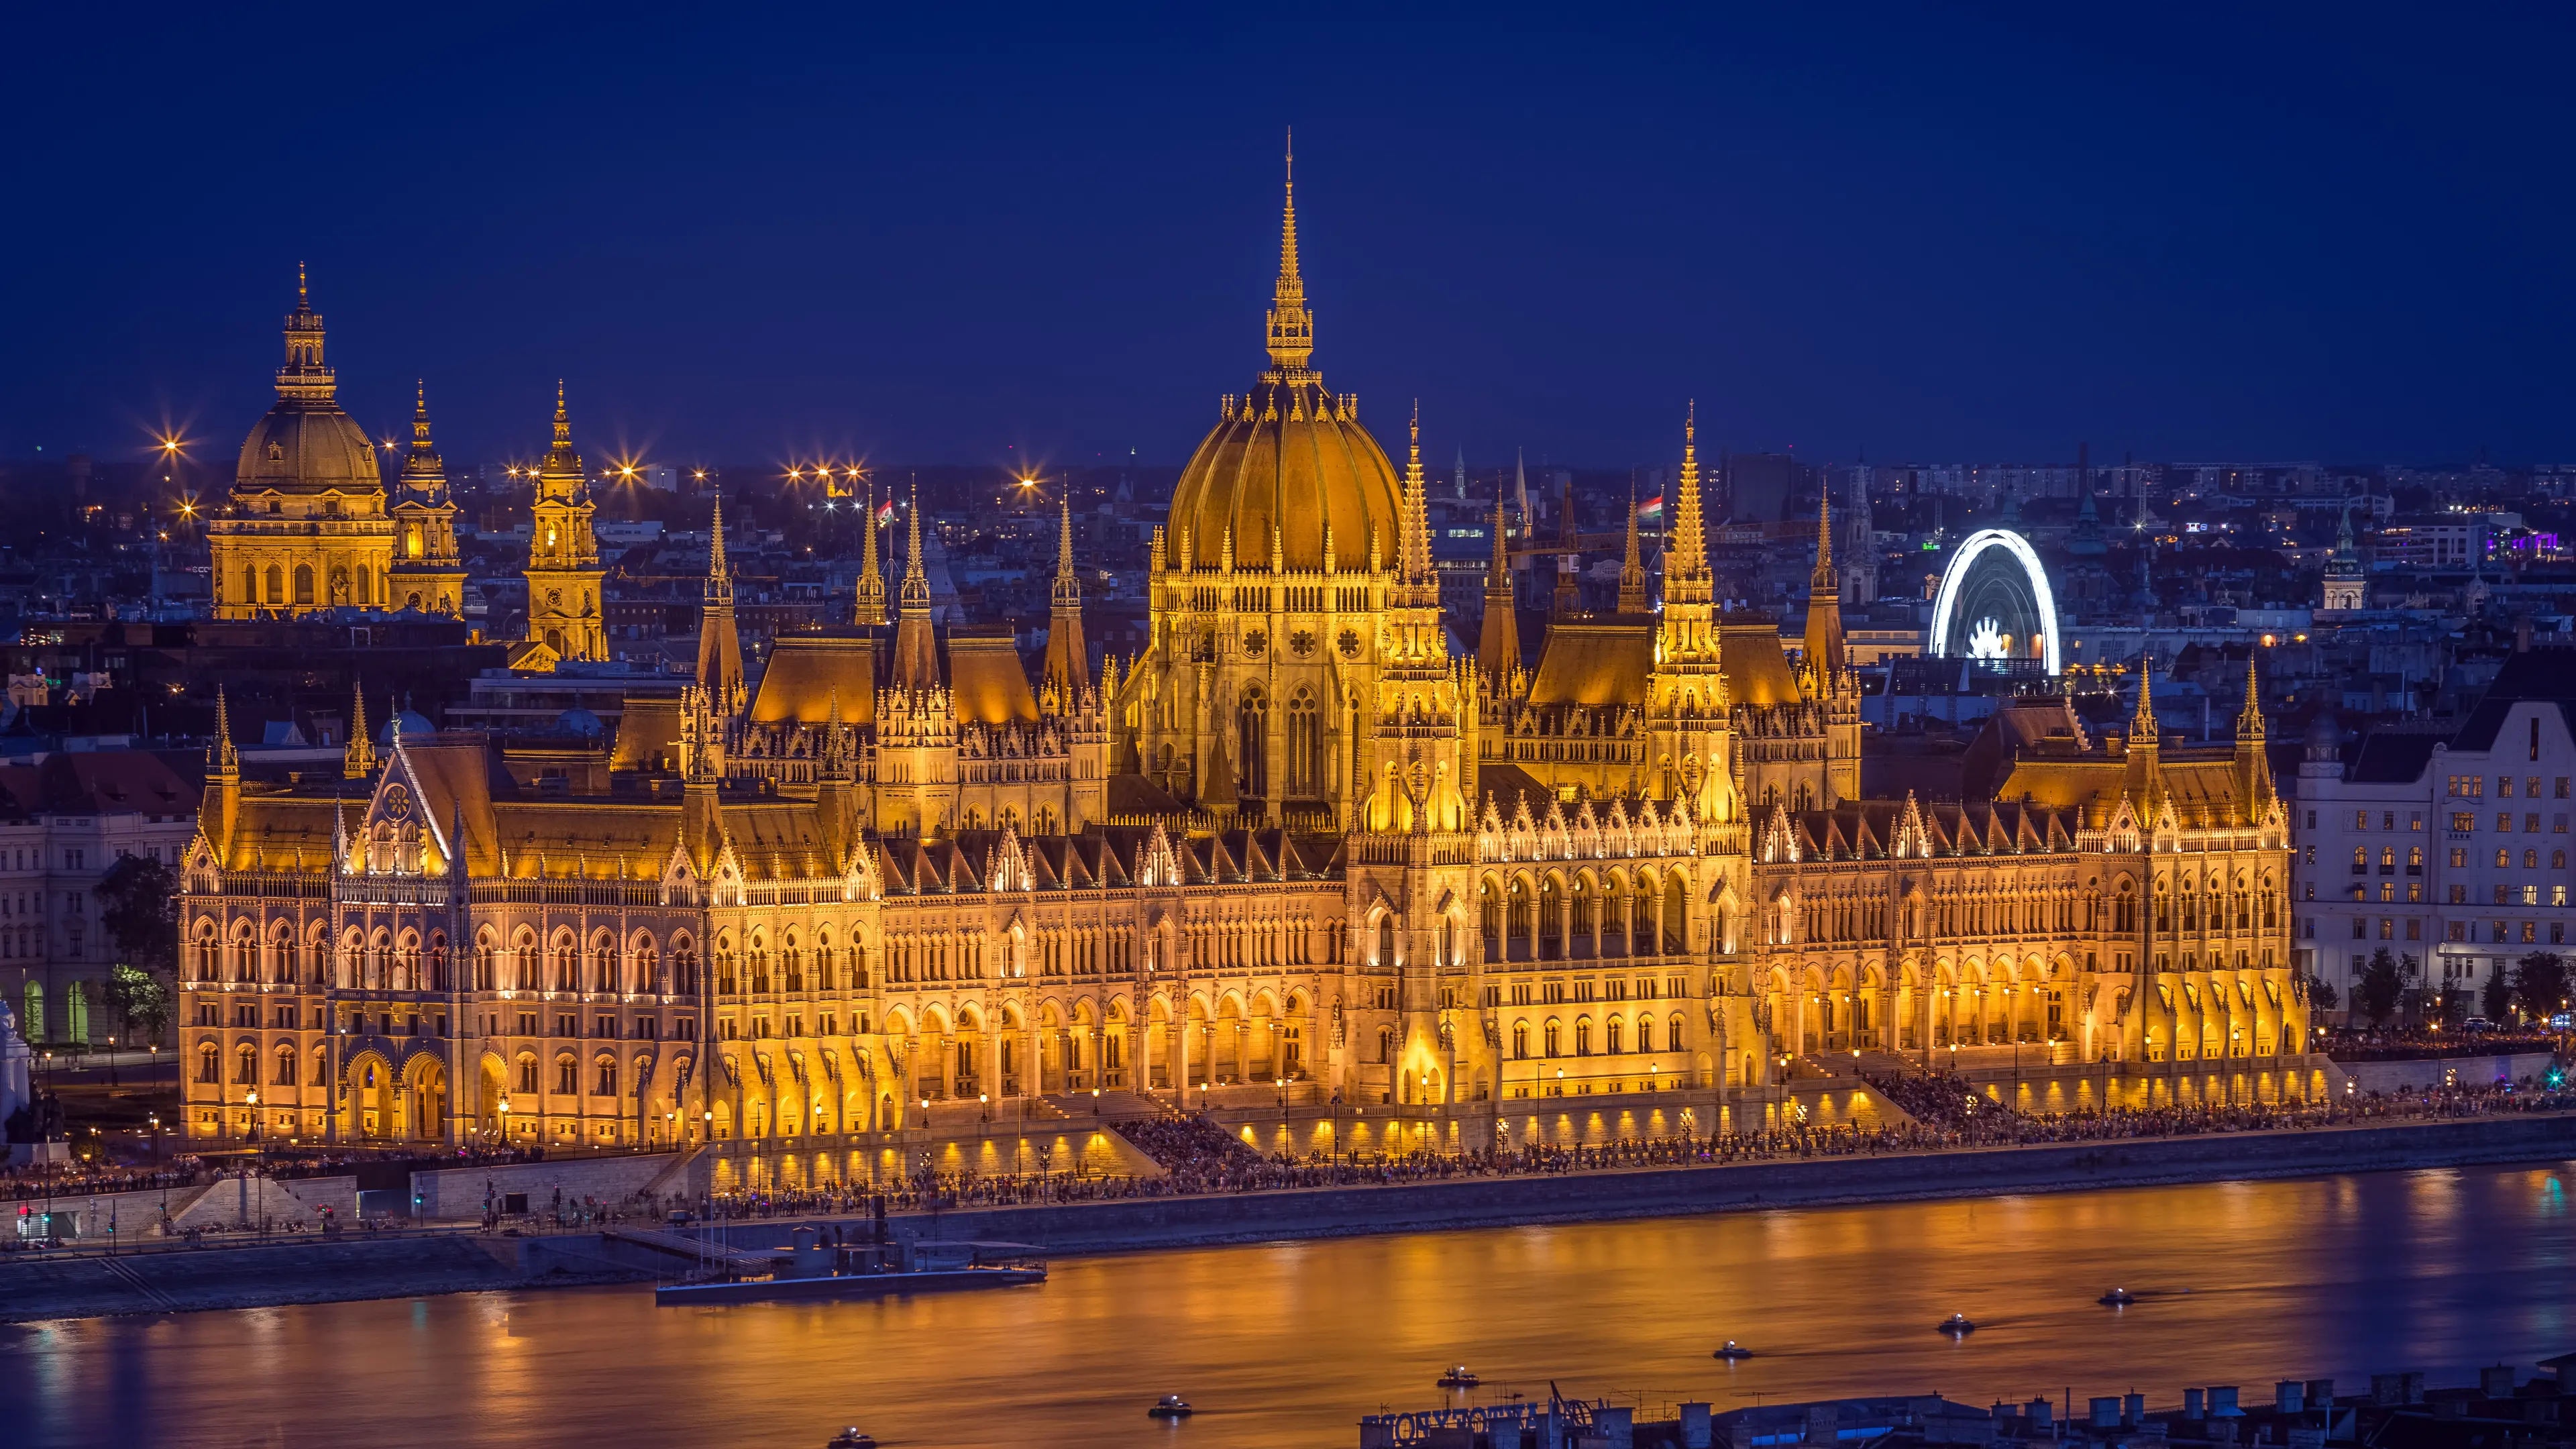 3-Day Local Adventure Experience with Friends in Budapest